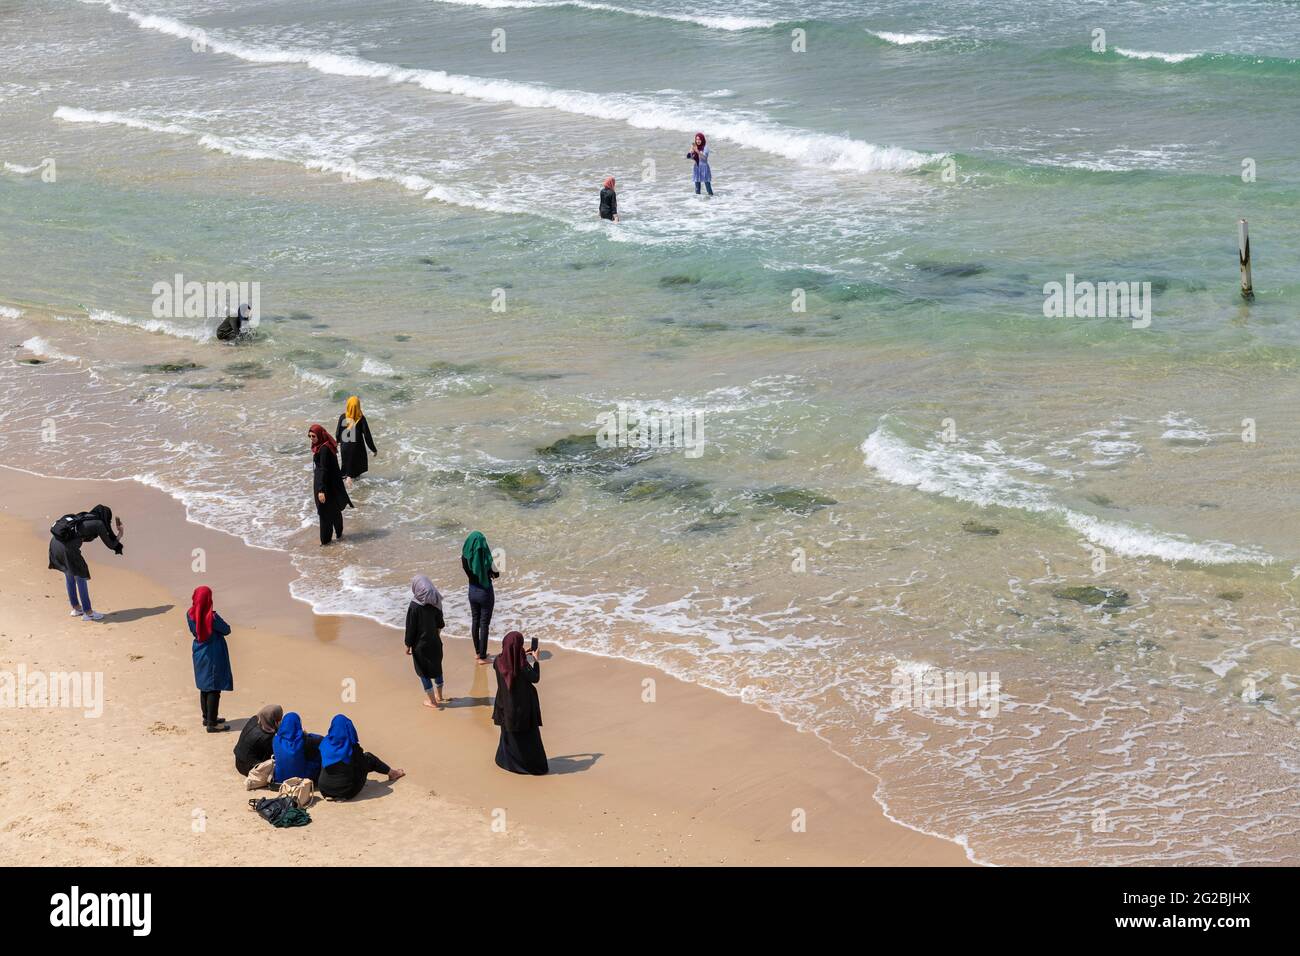 Muslim women wearing a headscarf - hijab, enjoying on the beach, Jaffa. Tel Aviv. Religious garments have become more common among Muslims in Israel Stock Photo